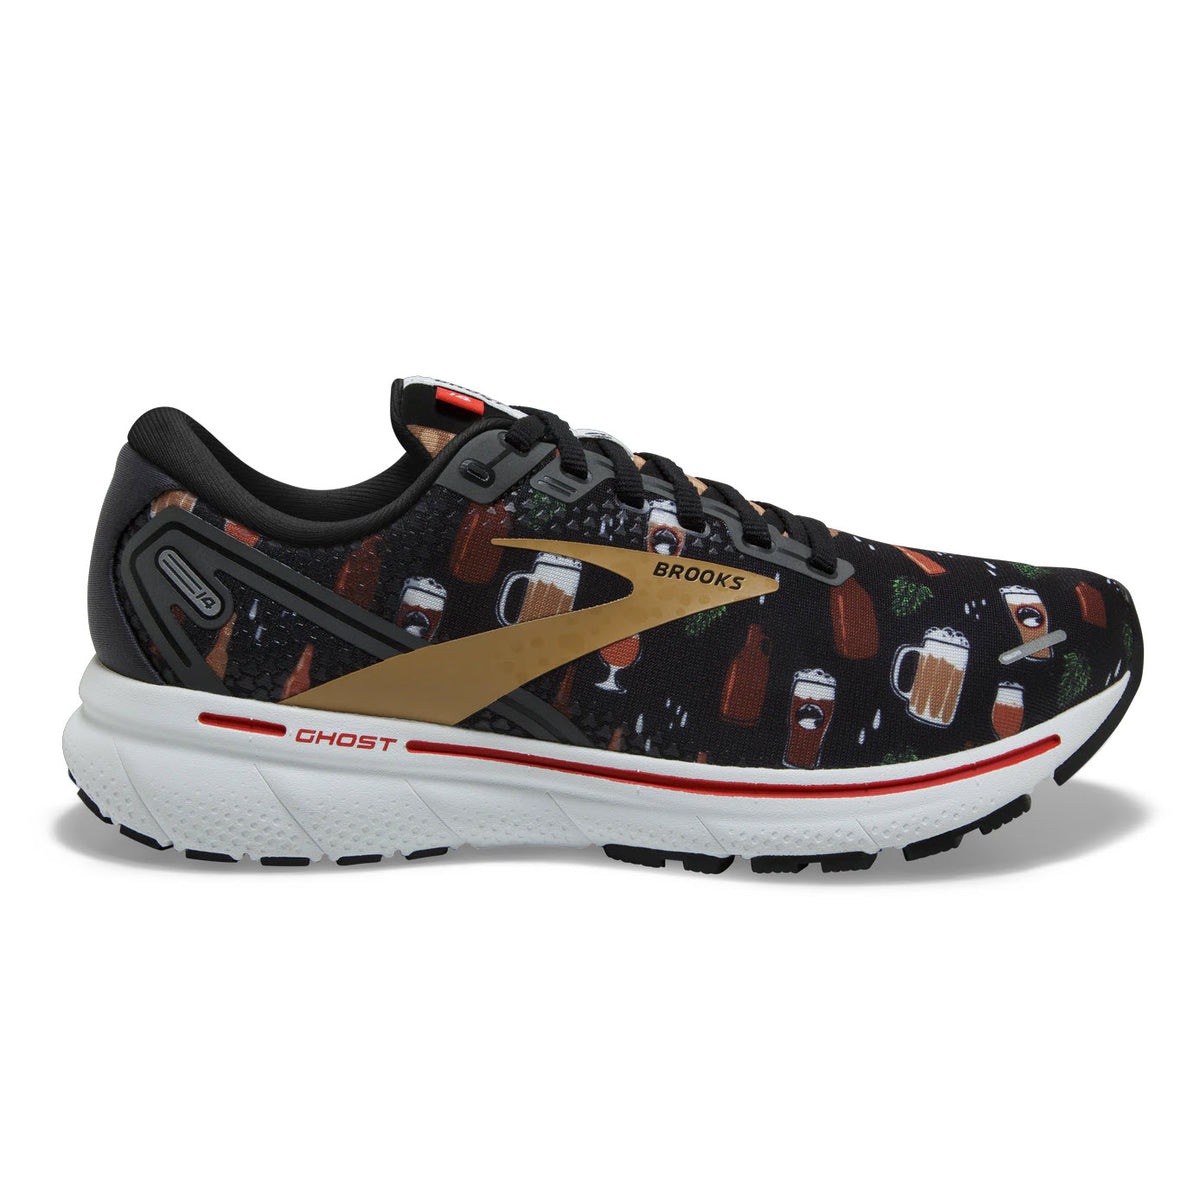 A patterned BROOKS GHOST 14 LIMITED EDITION BLACK/WHITE/FIERY RED - WOMENS running shoe with soft cushioning and ghost model branding.